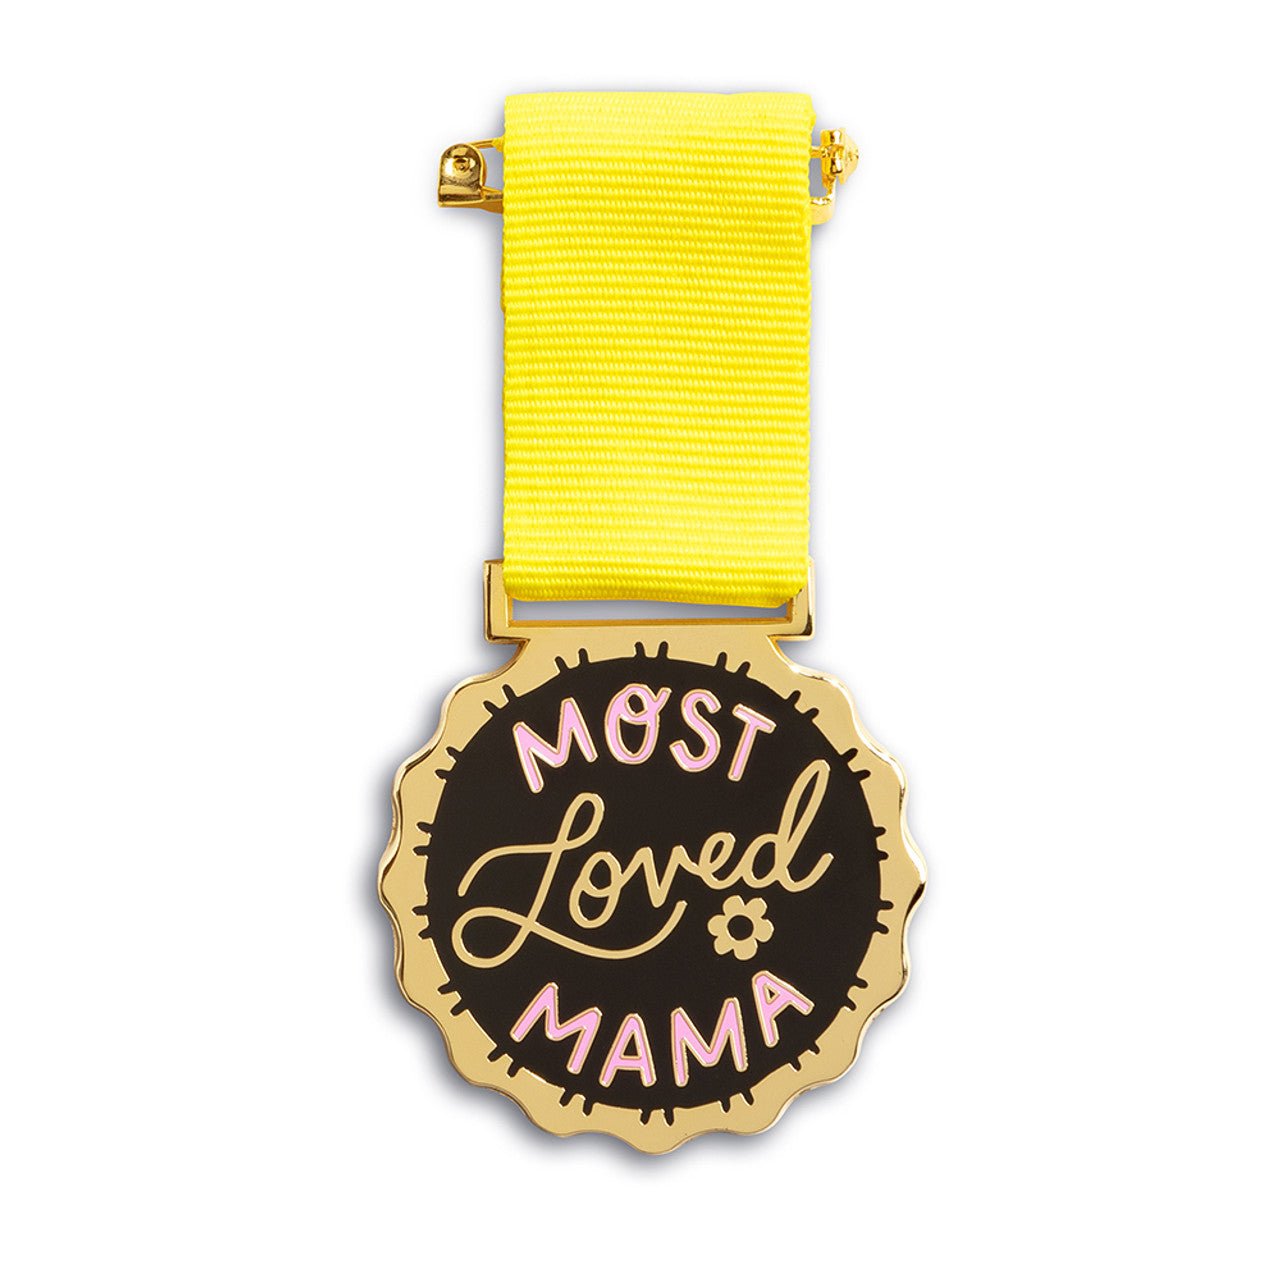 Most Loved Mama Medal - The Kindness Cause